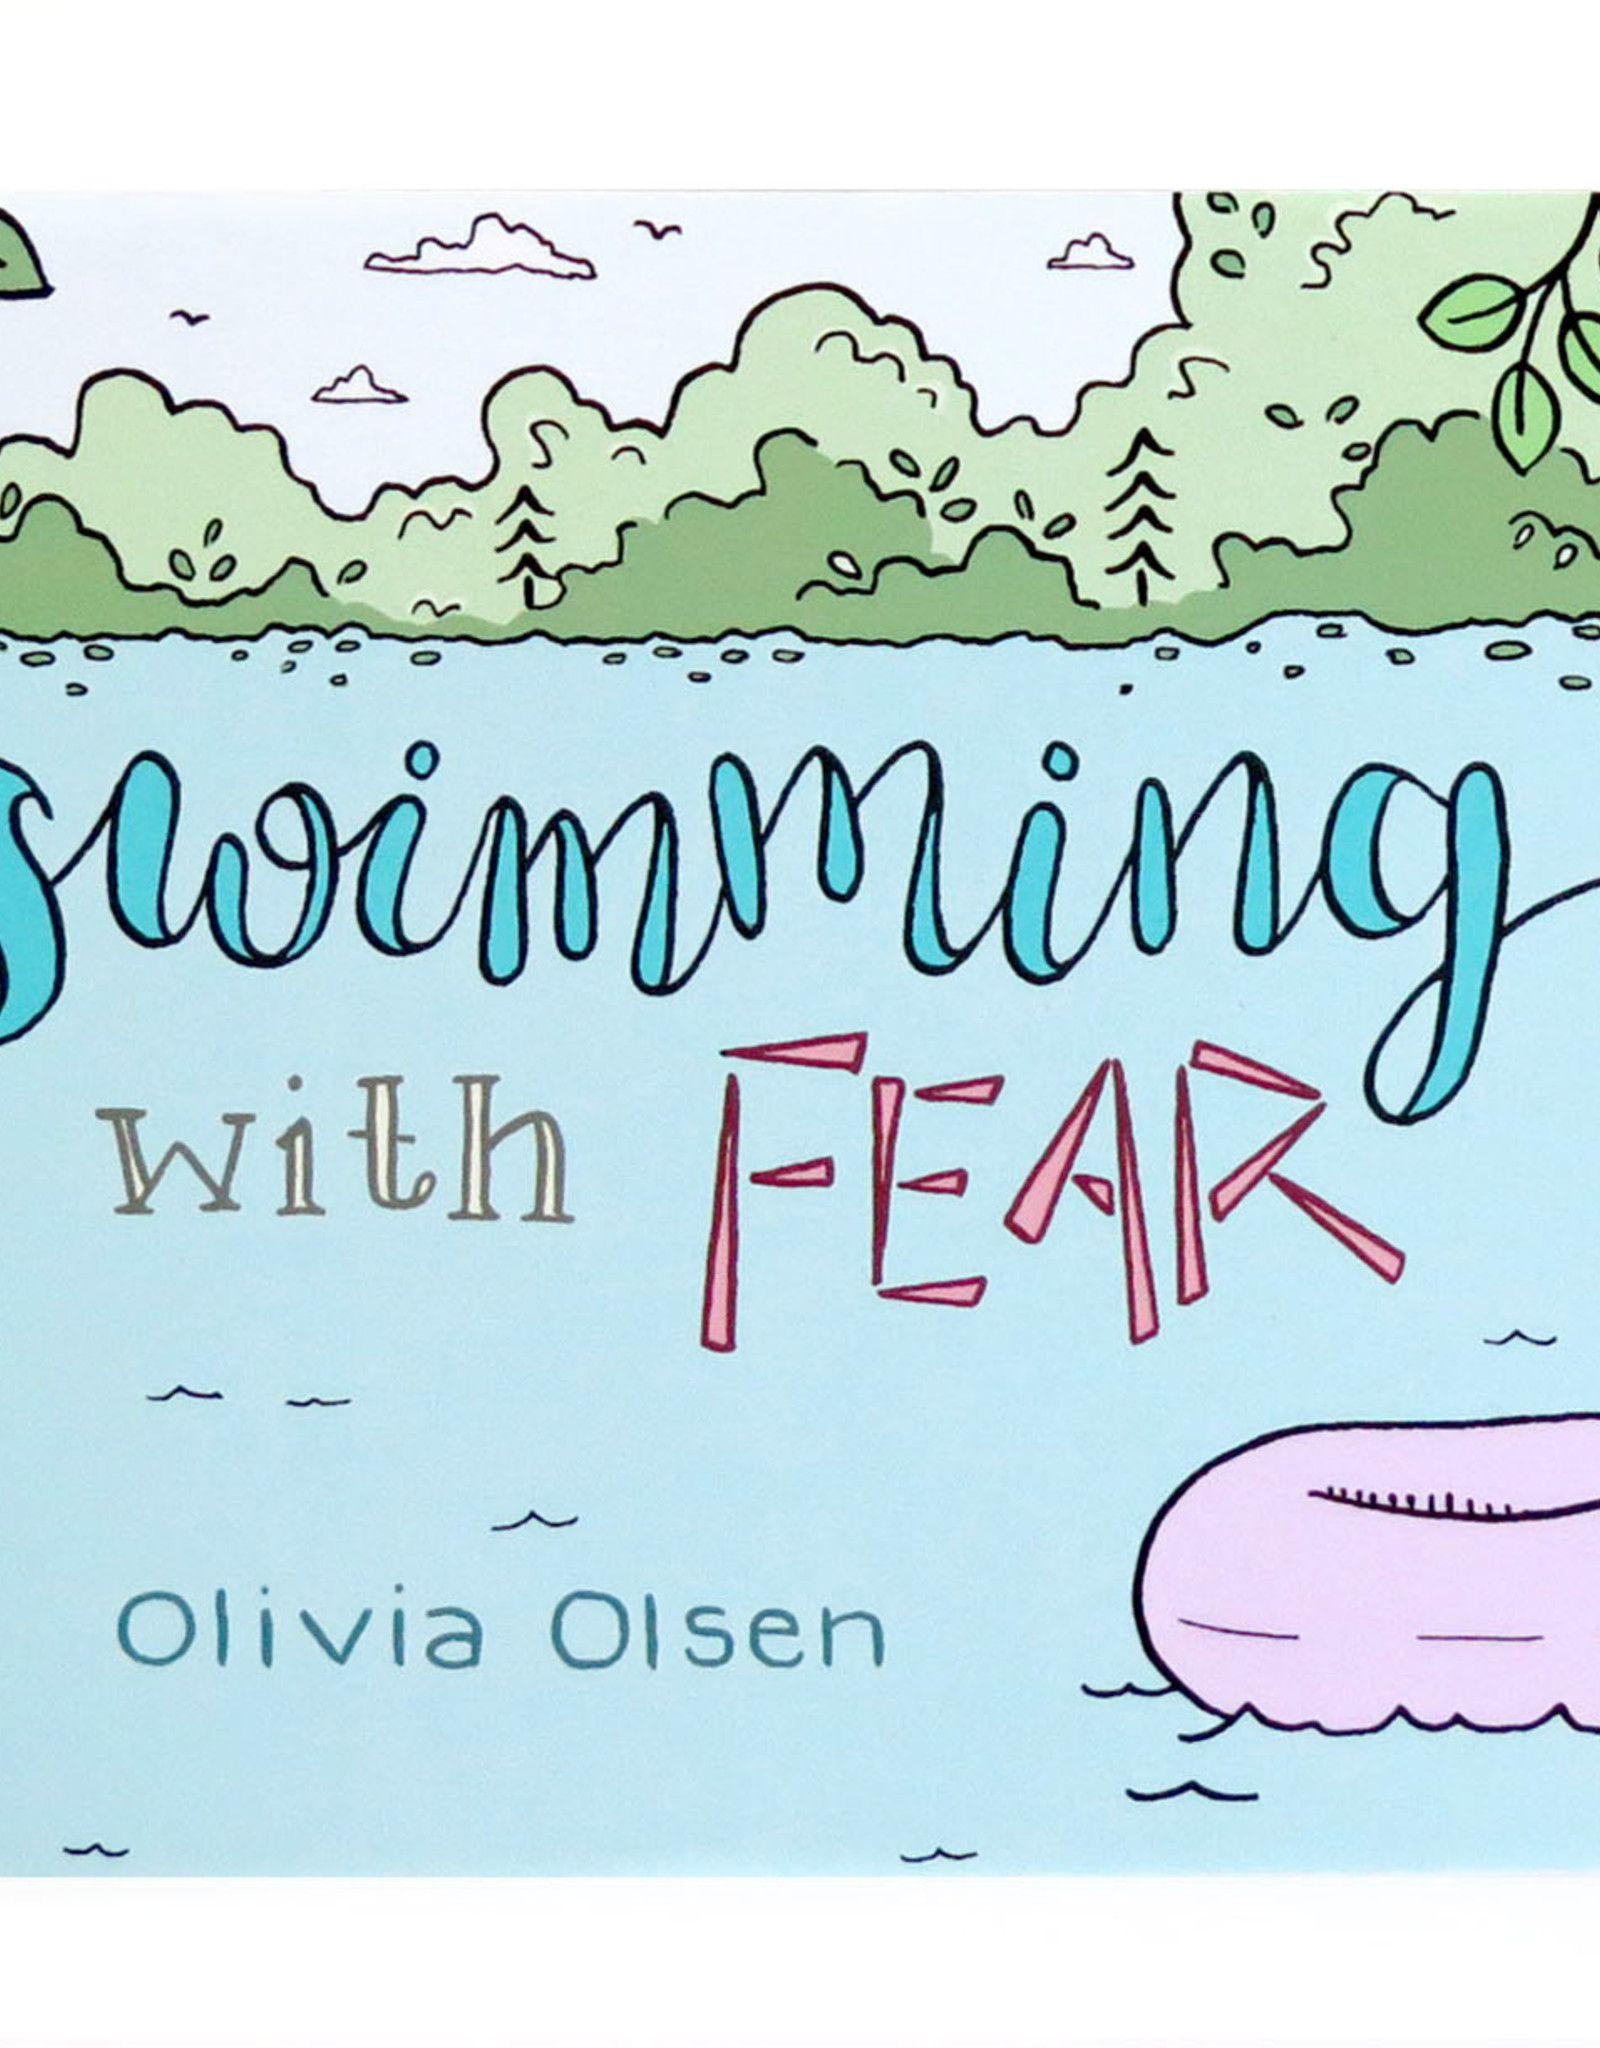 “Swimming with fear” zine by Olivia Olsen